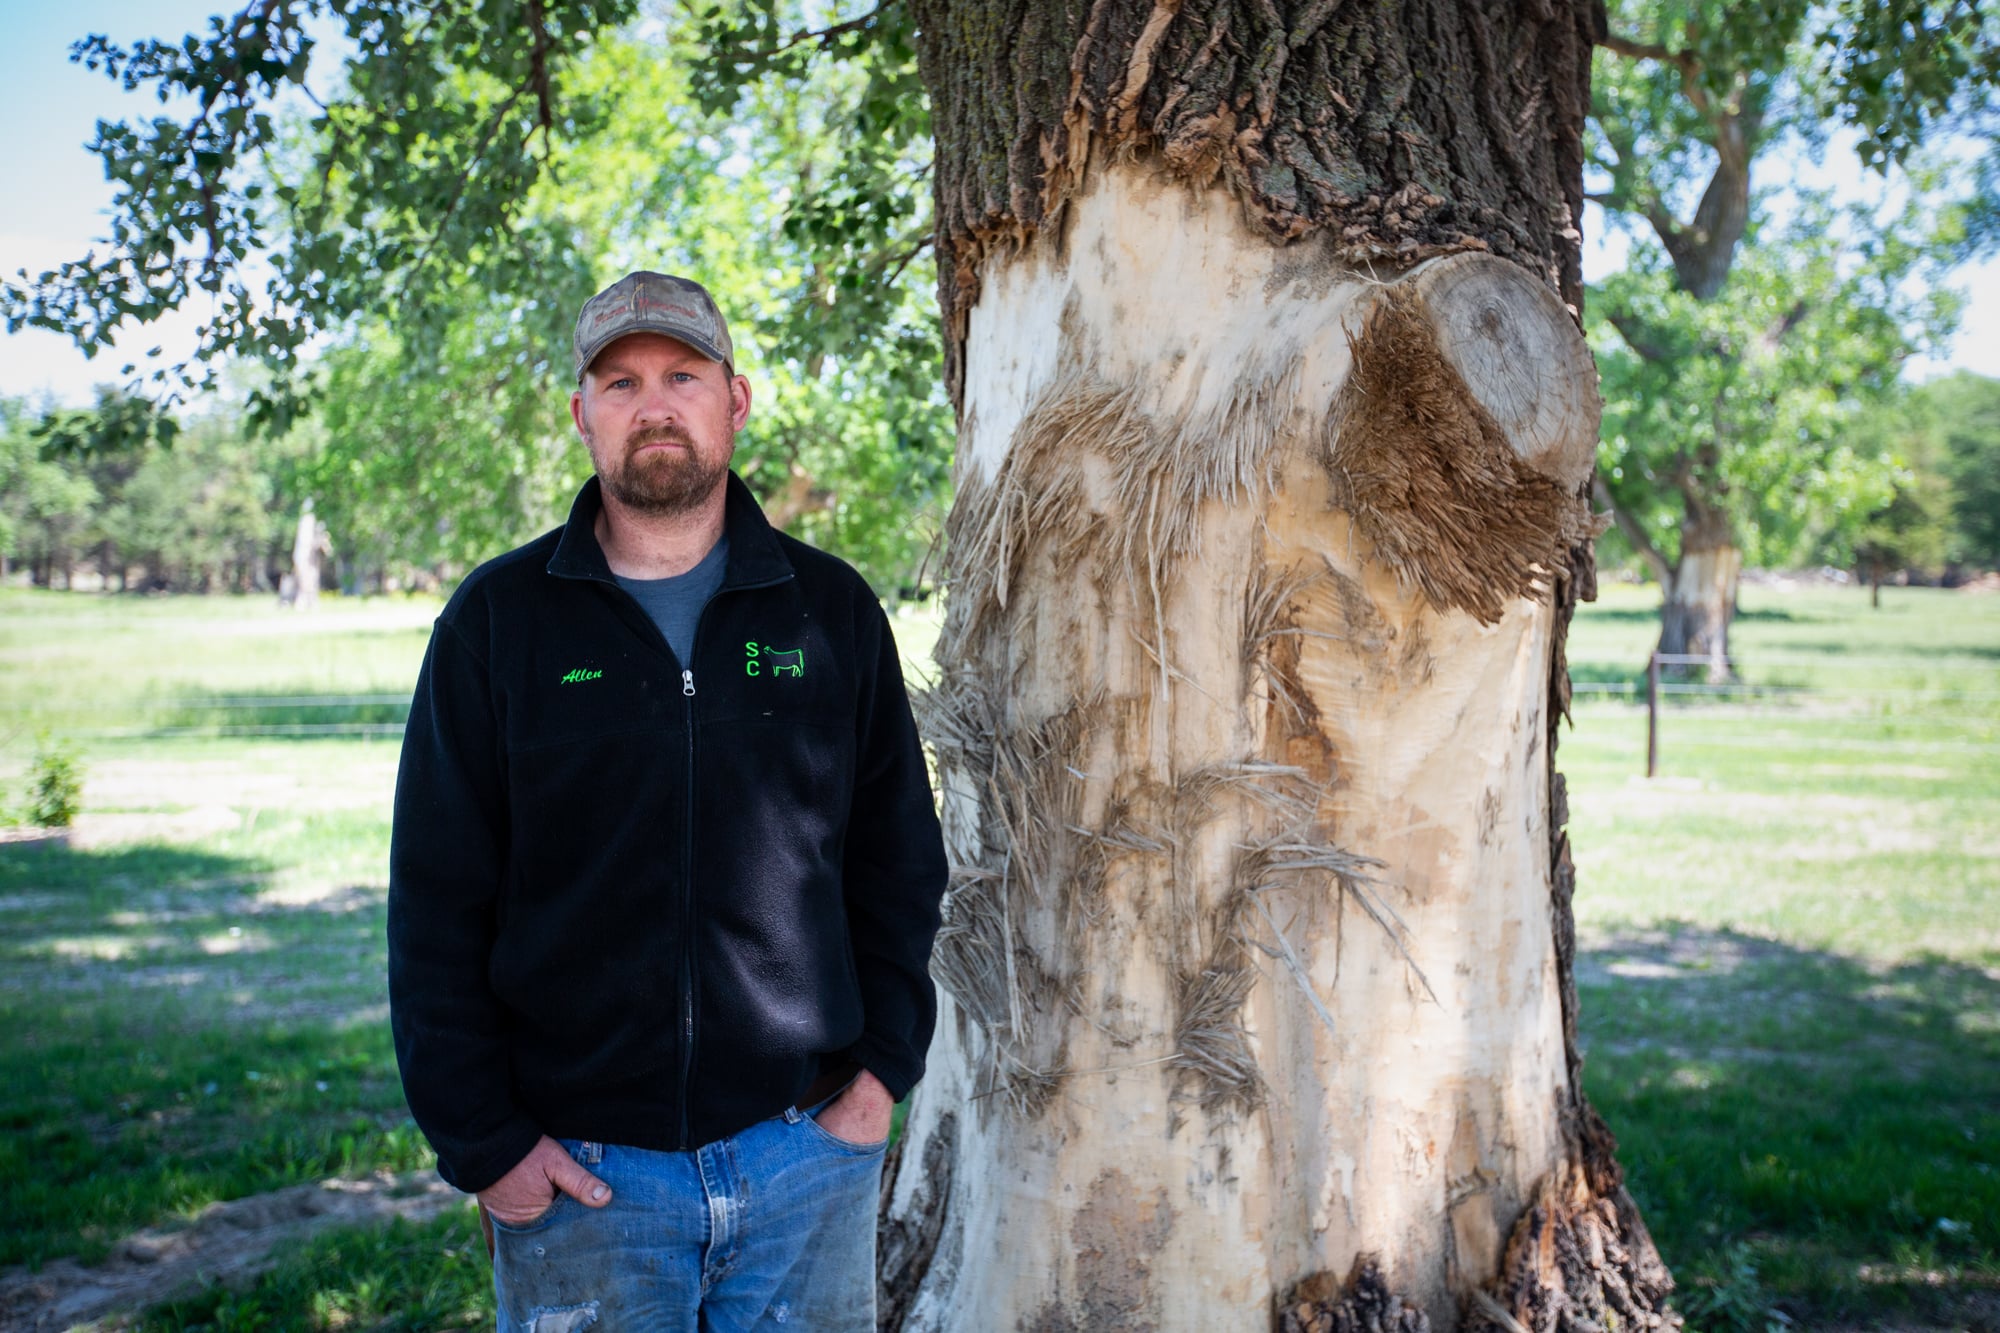 Anthony Ruzicka stands next to a tree on his Nebraska property whose trunk shows at least 6 feet of damage from large ice chunks that flooded the property last spring. In addition to many outbuildings, the Ruzickas lost their home. (Anya Magnuson/News21)